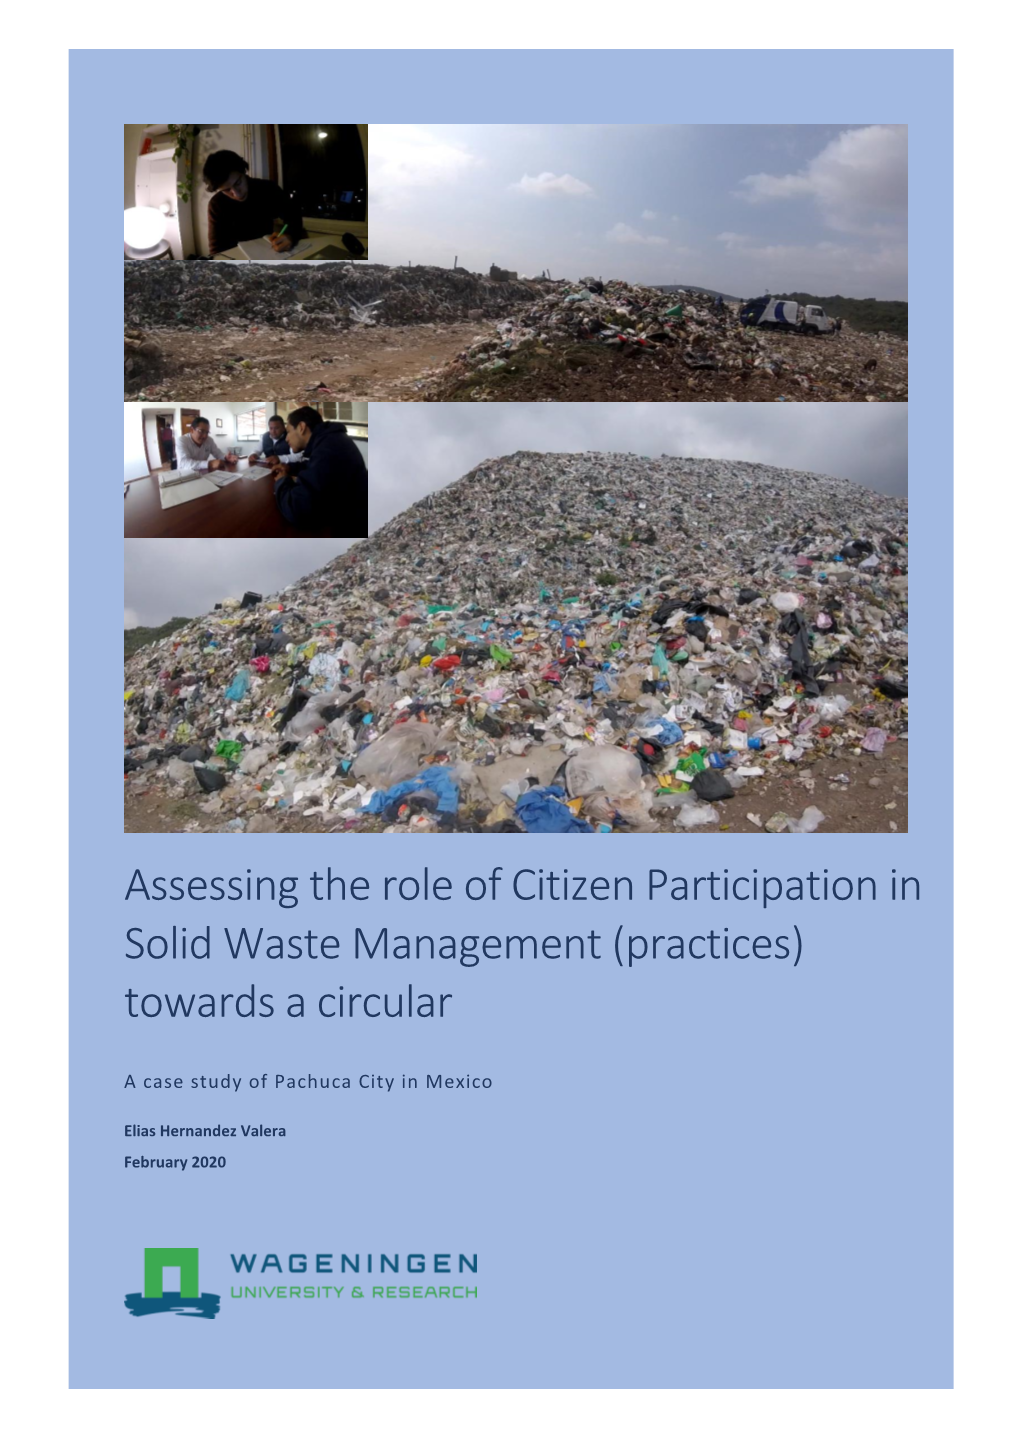 Assessing the Role of Citizen Participation in Solid Waste Management (Practices) Towards a Circular